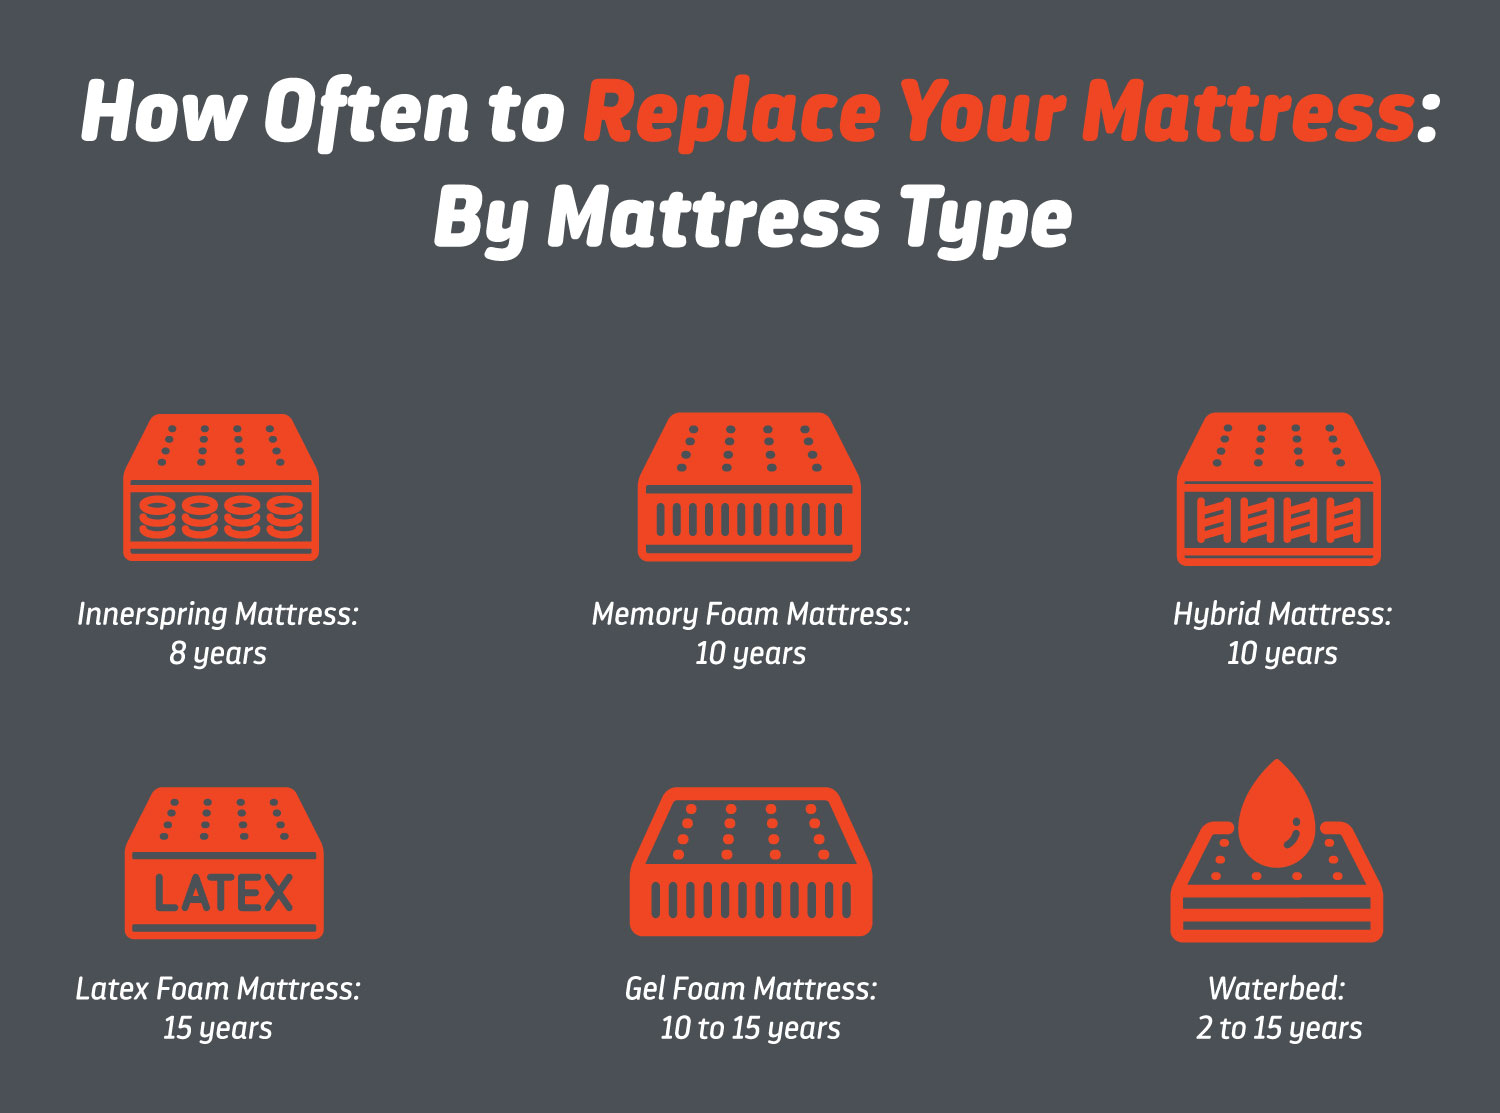 How Often to Replace Your Mattress (By Mattress Type)